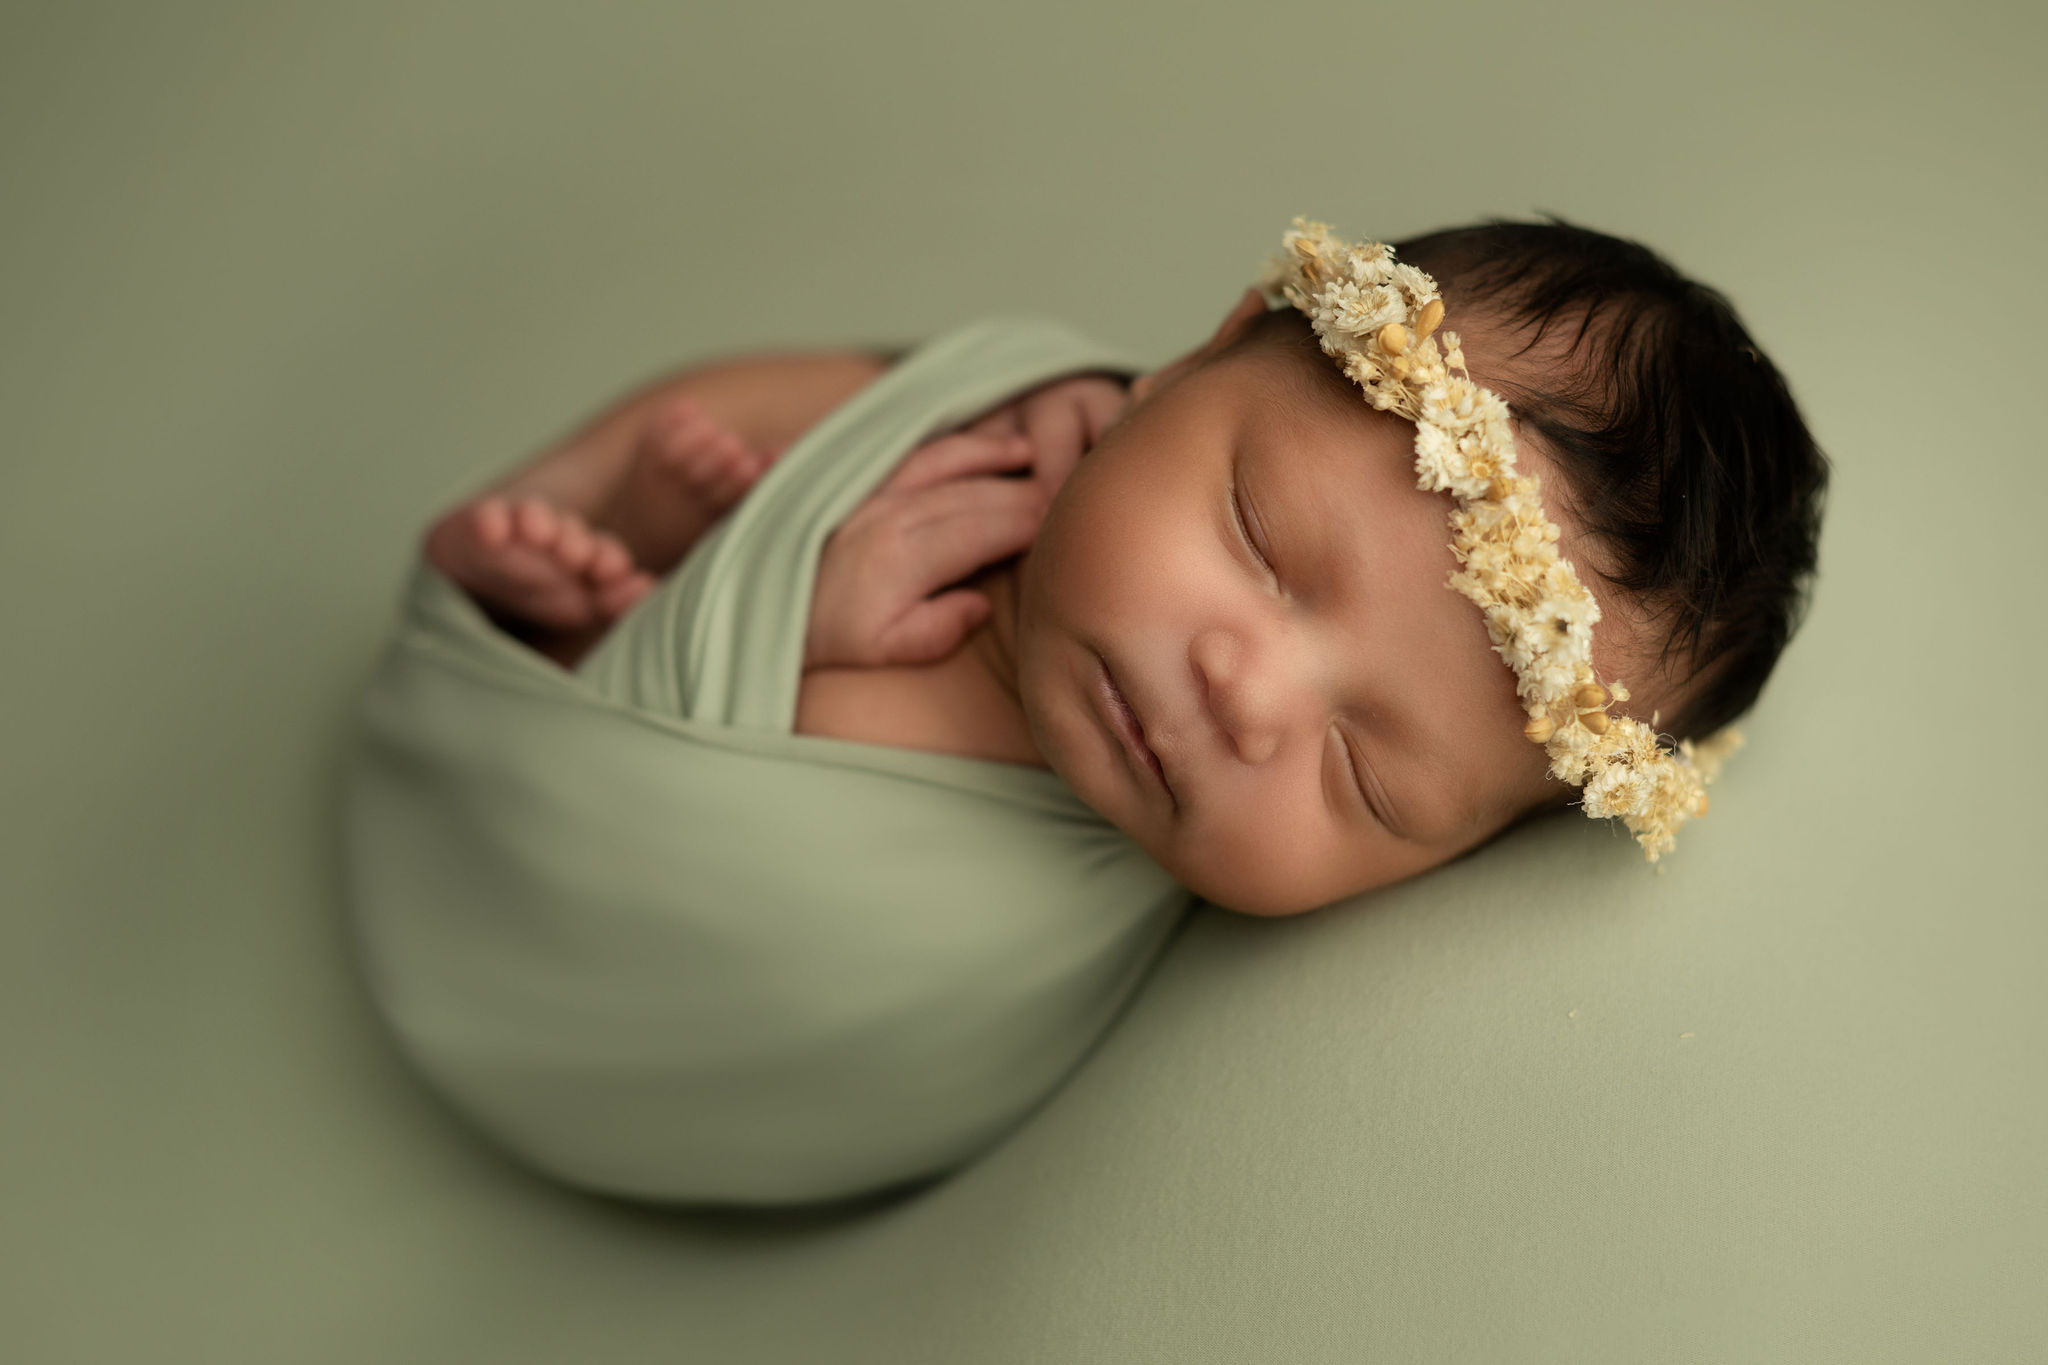 wearing a floral headband, a newborn baby sleeps swaddled in green blanket tampa baby boutique